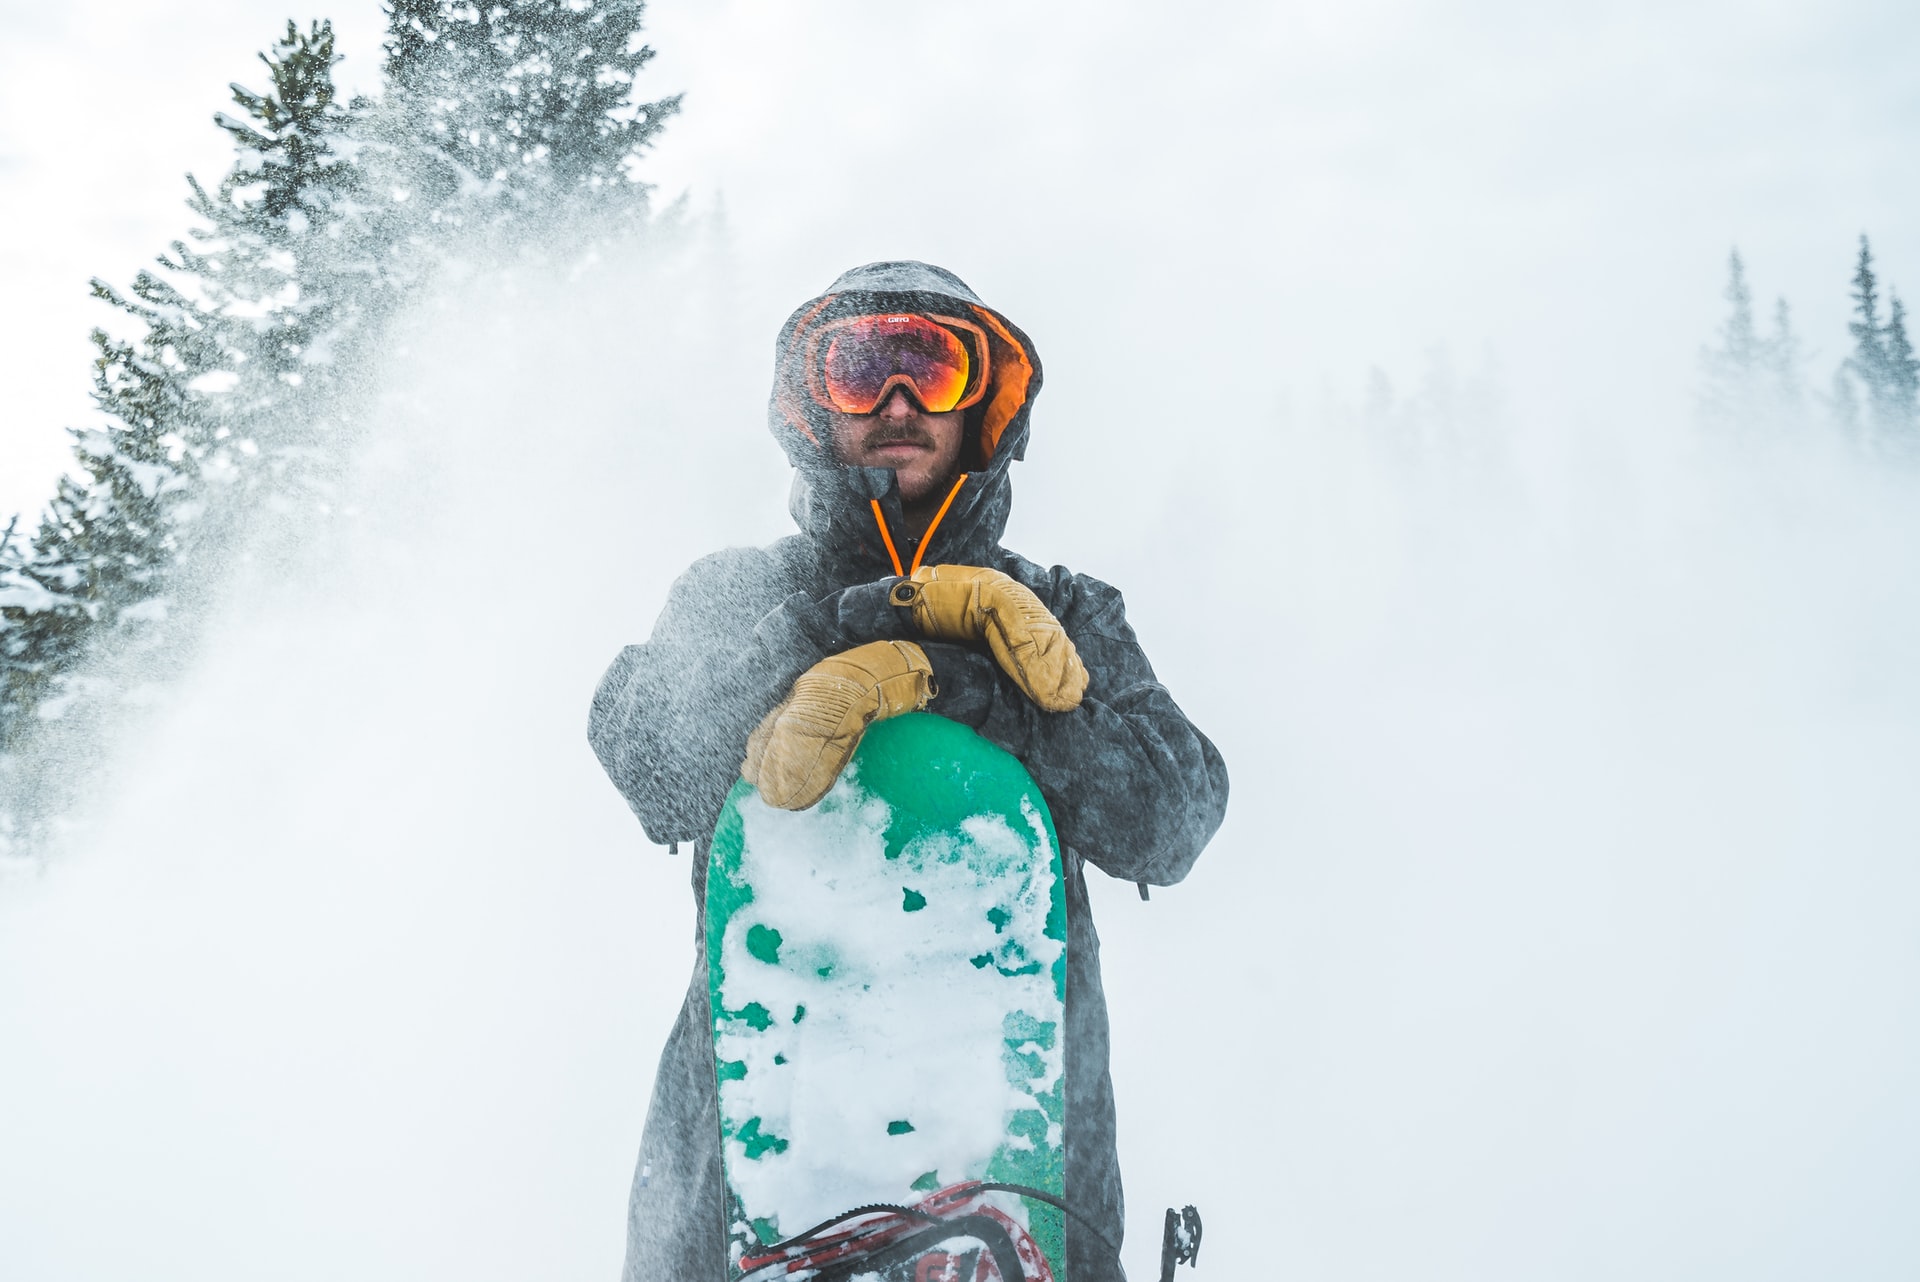 How To Become A Professional Snowboarder?